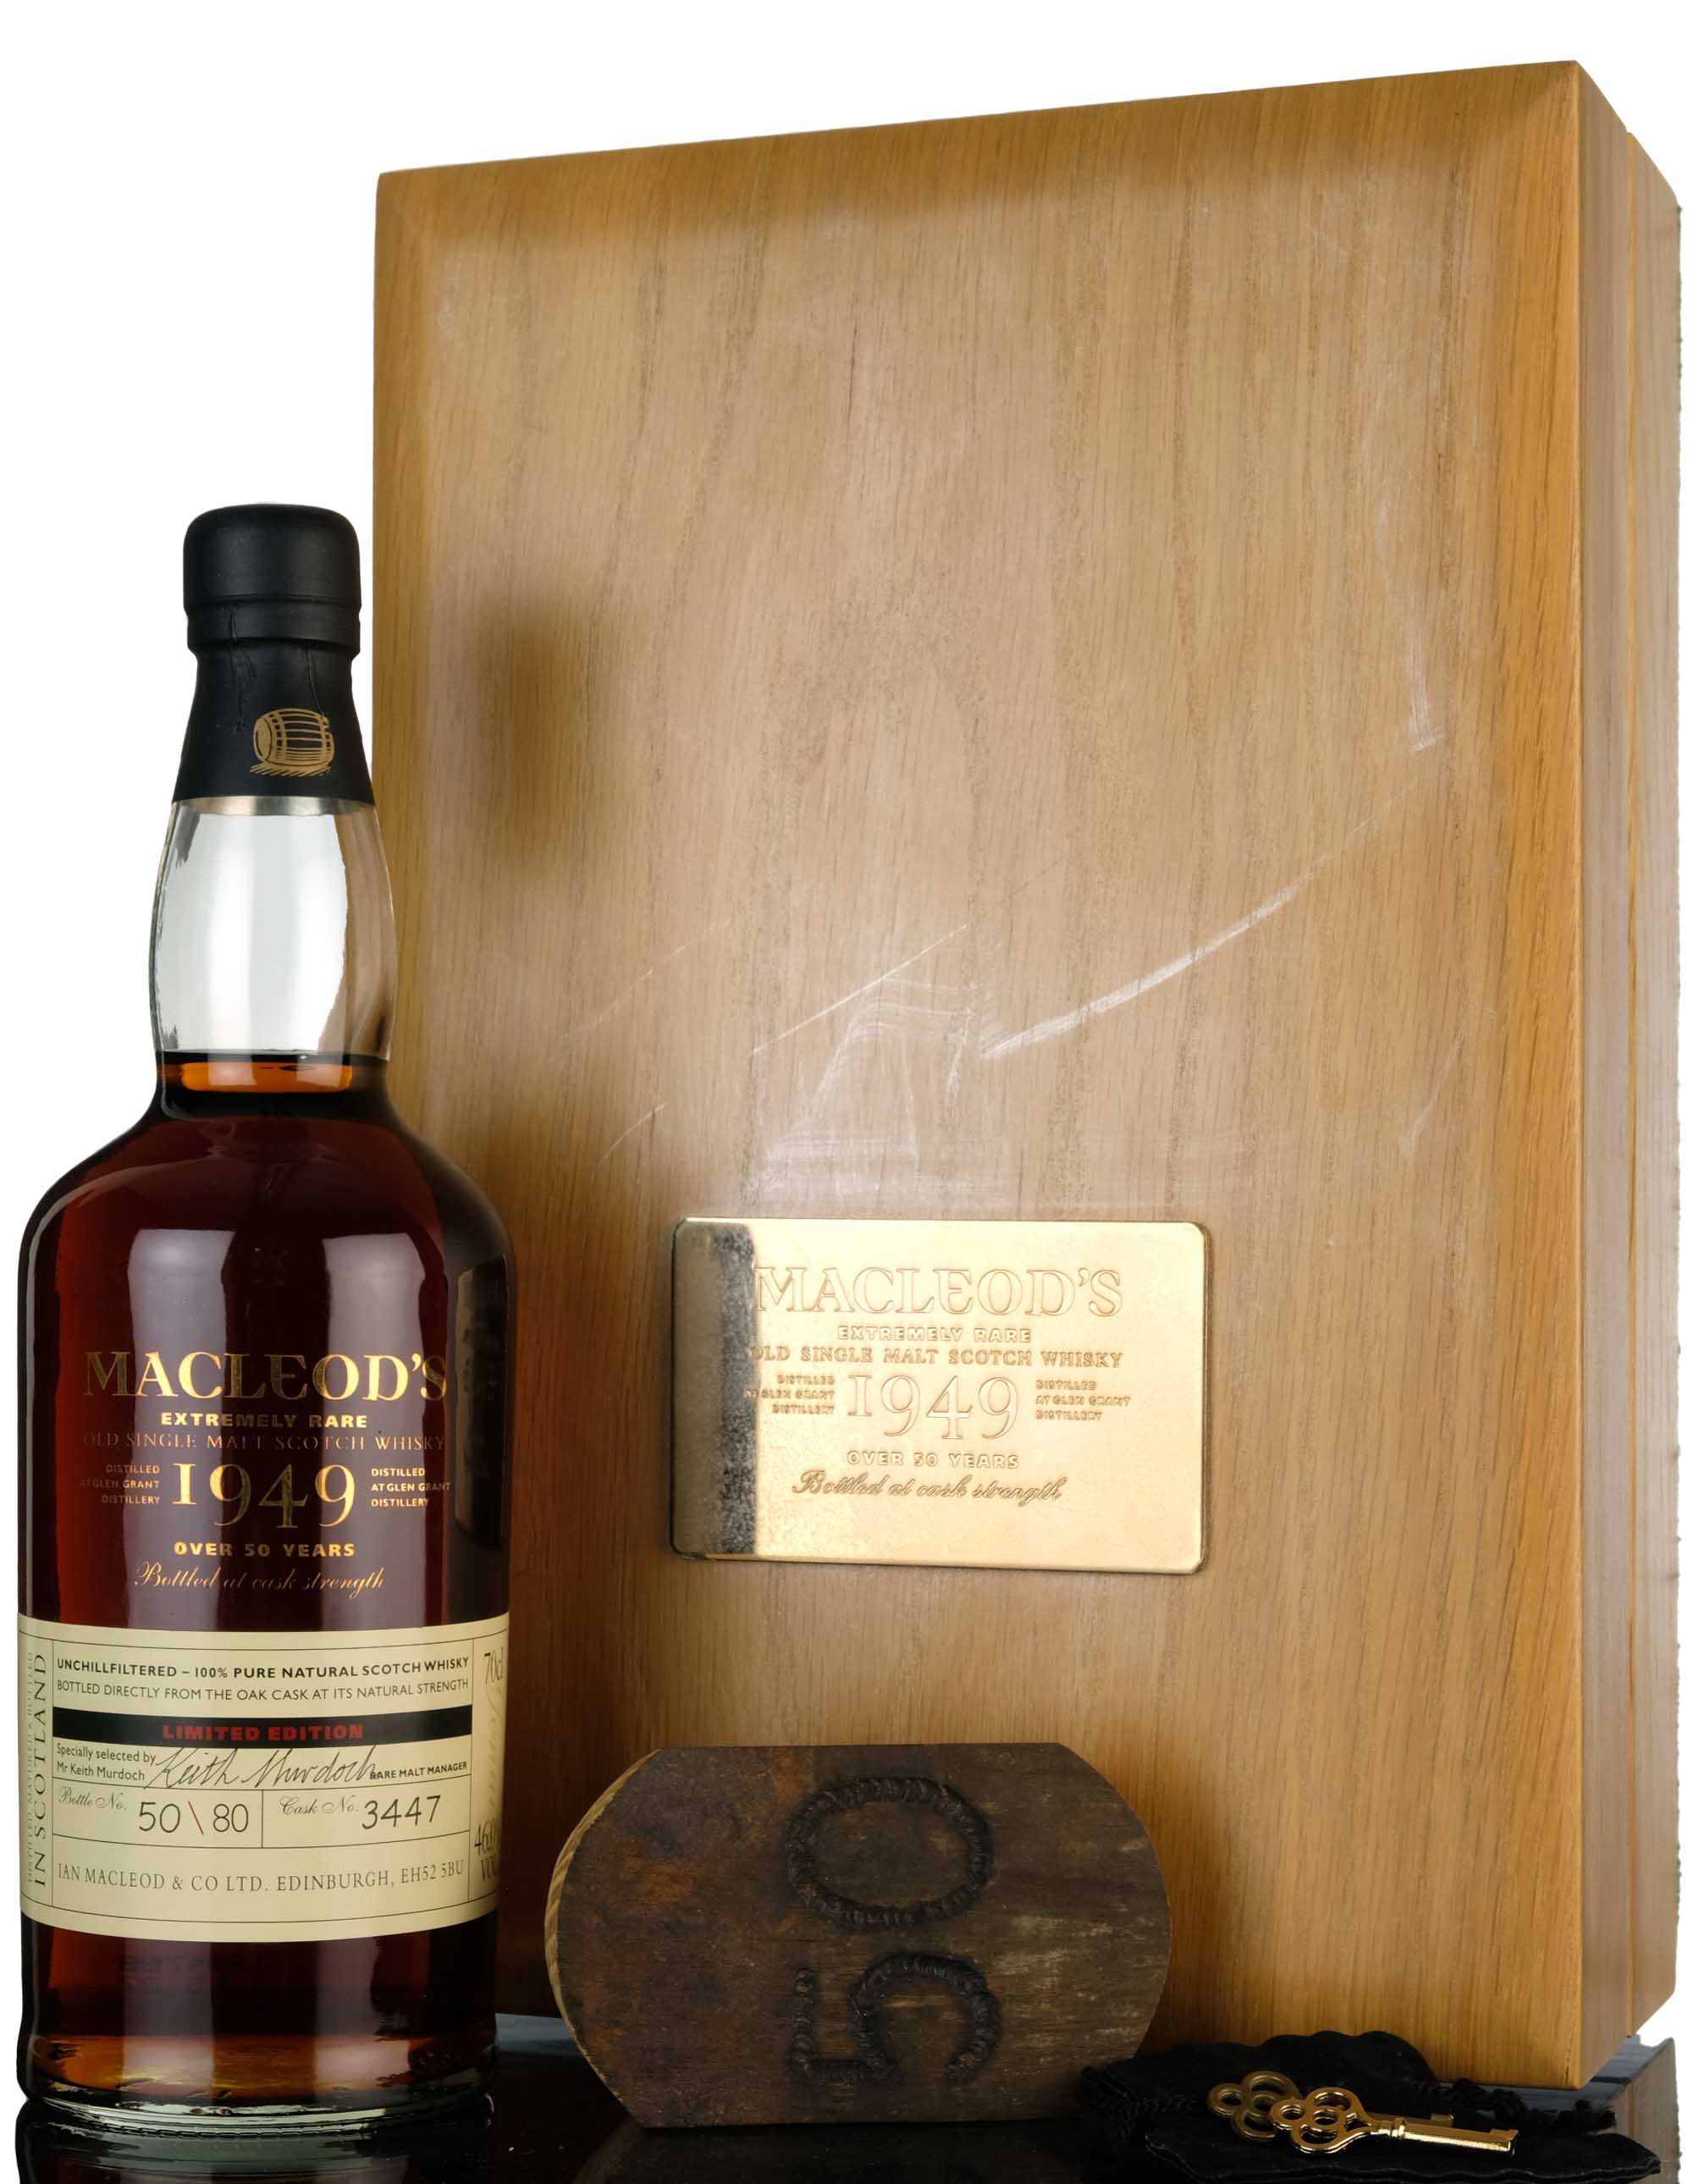 Glen Grant 1949-1999 - 50 Year Old - Macleods Extremely Rare - Single Cask 3447